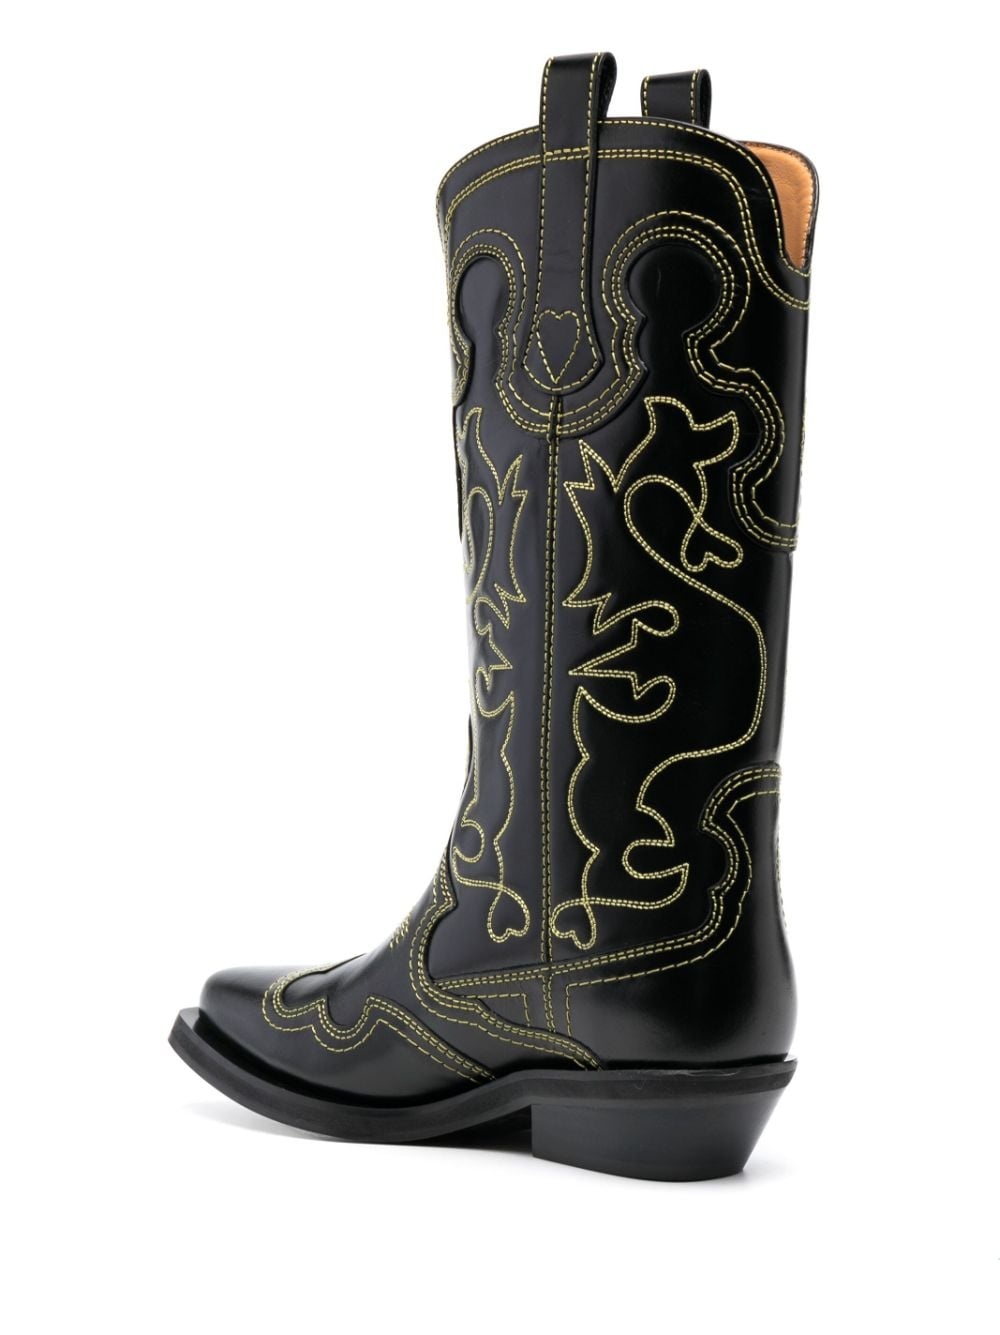 Embroidered leather western boots - 2